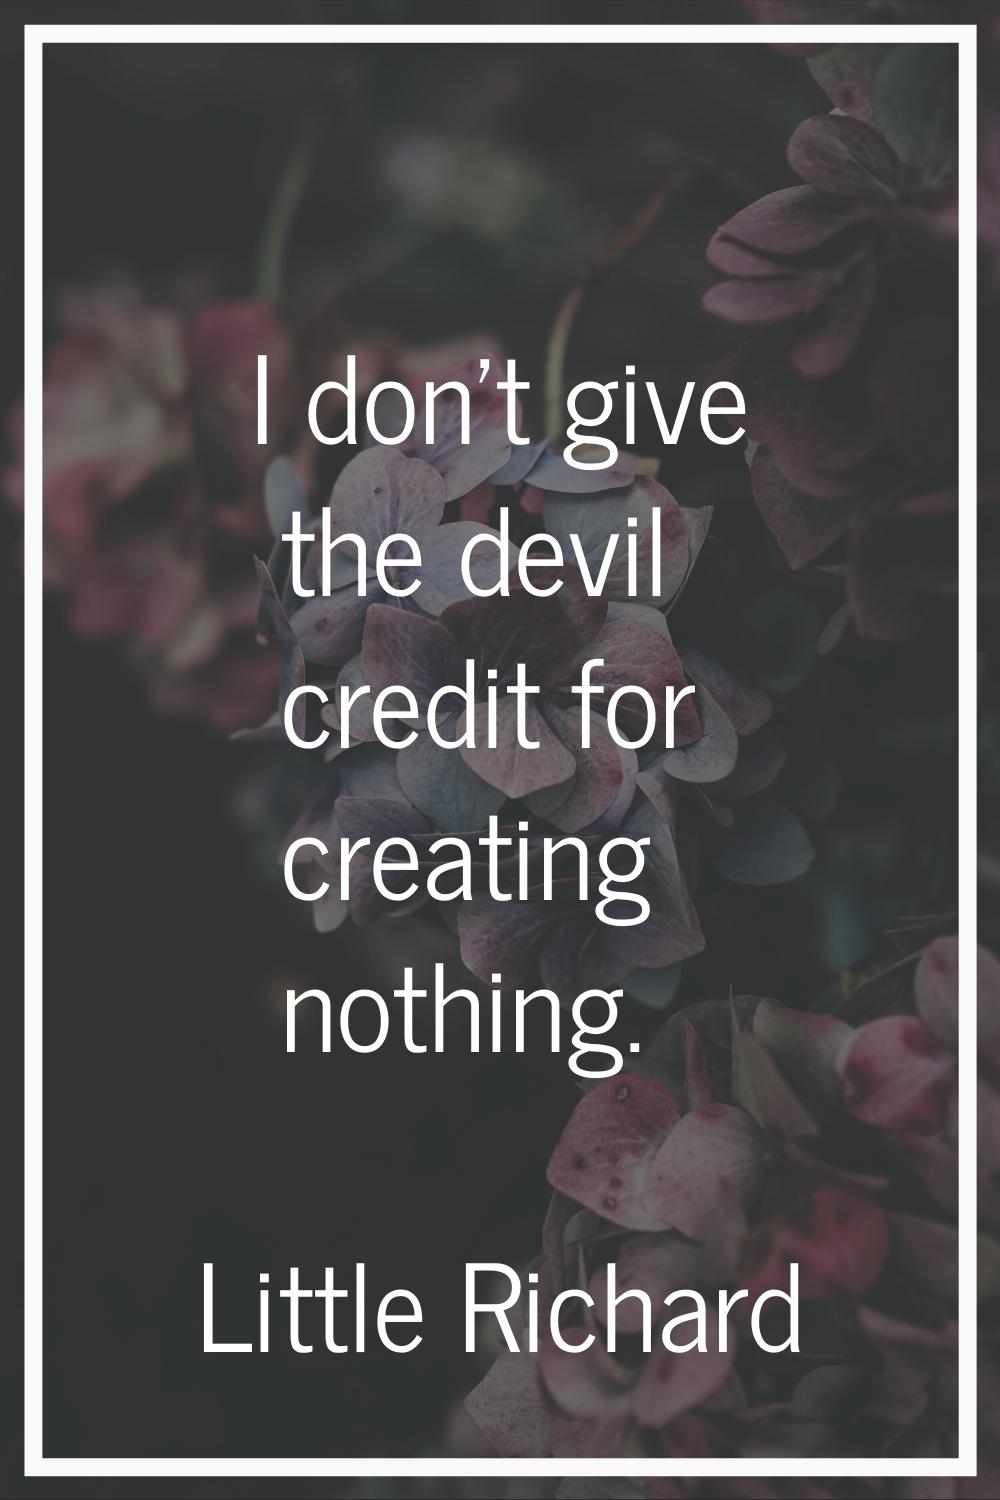 I don't give the devil credit for creating nothing.